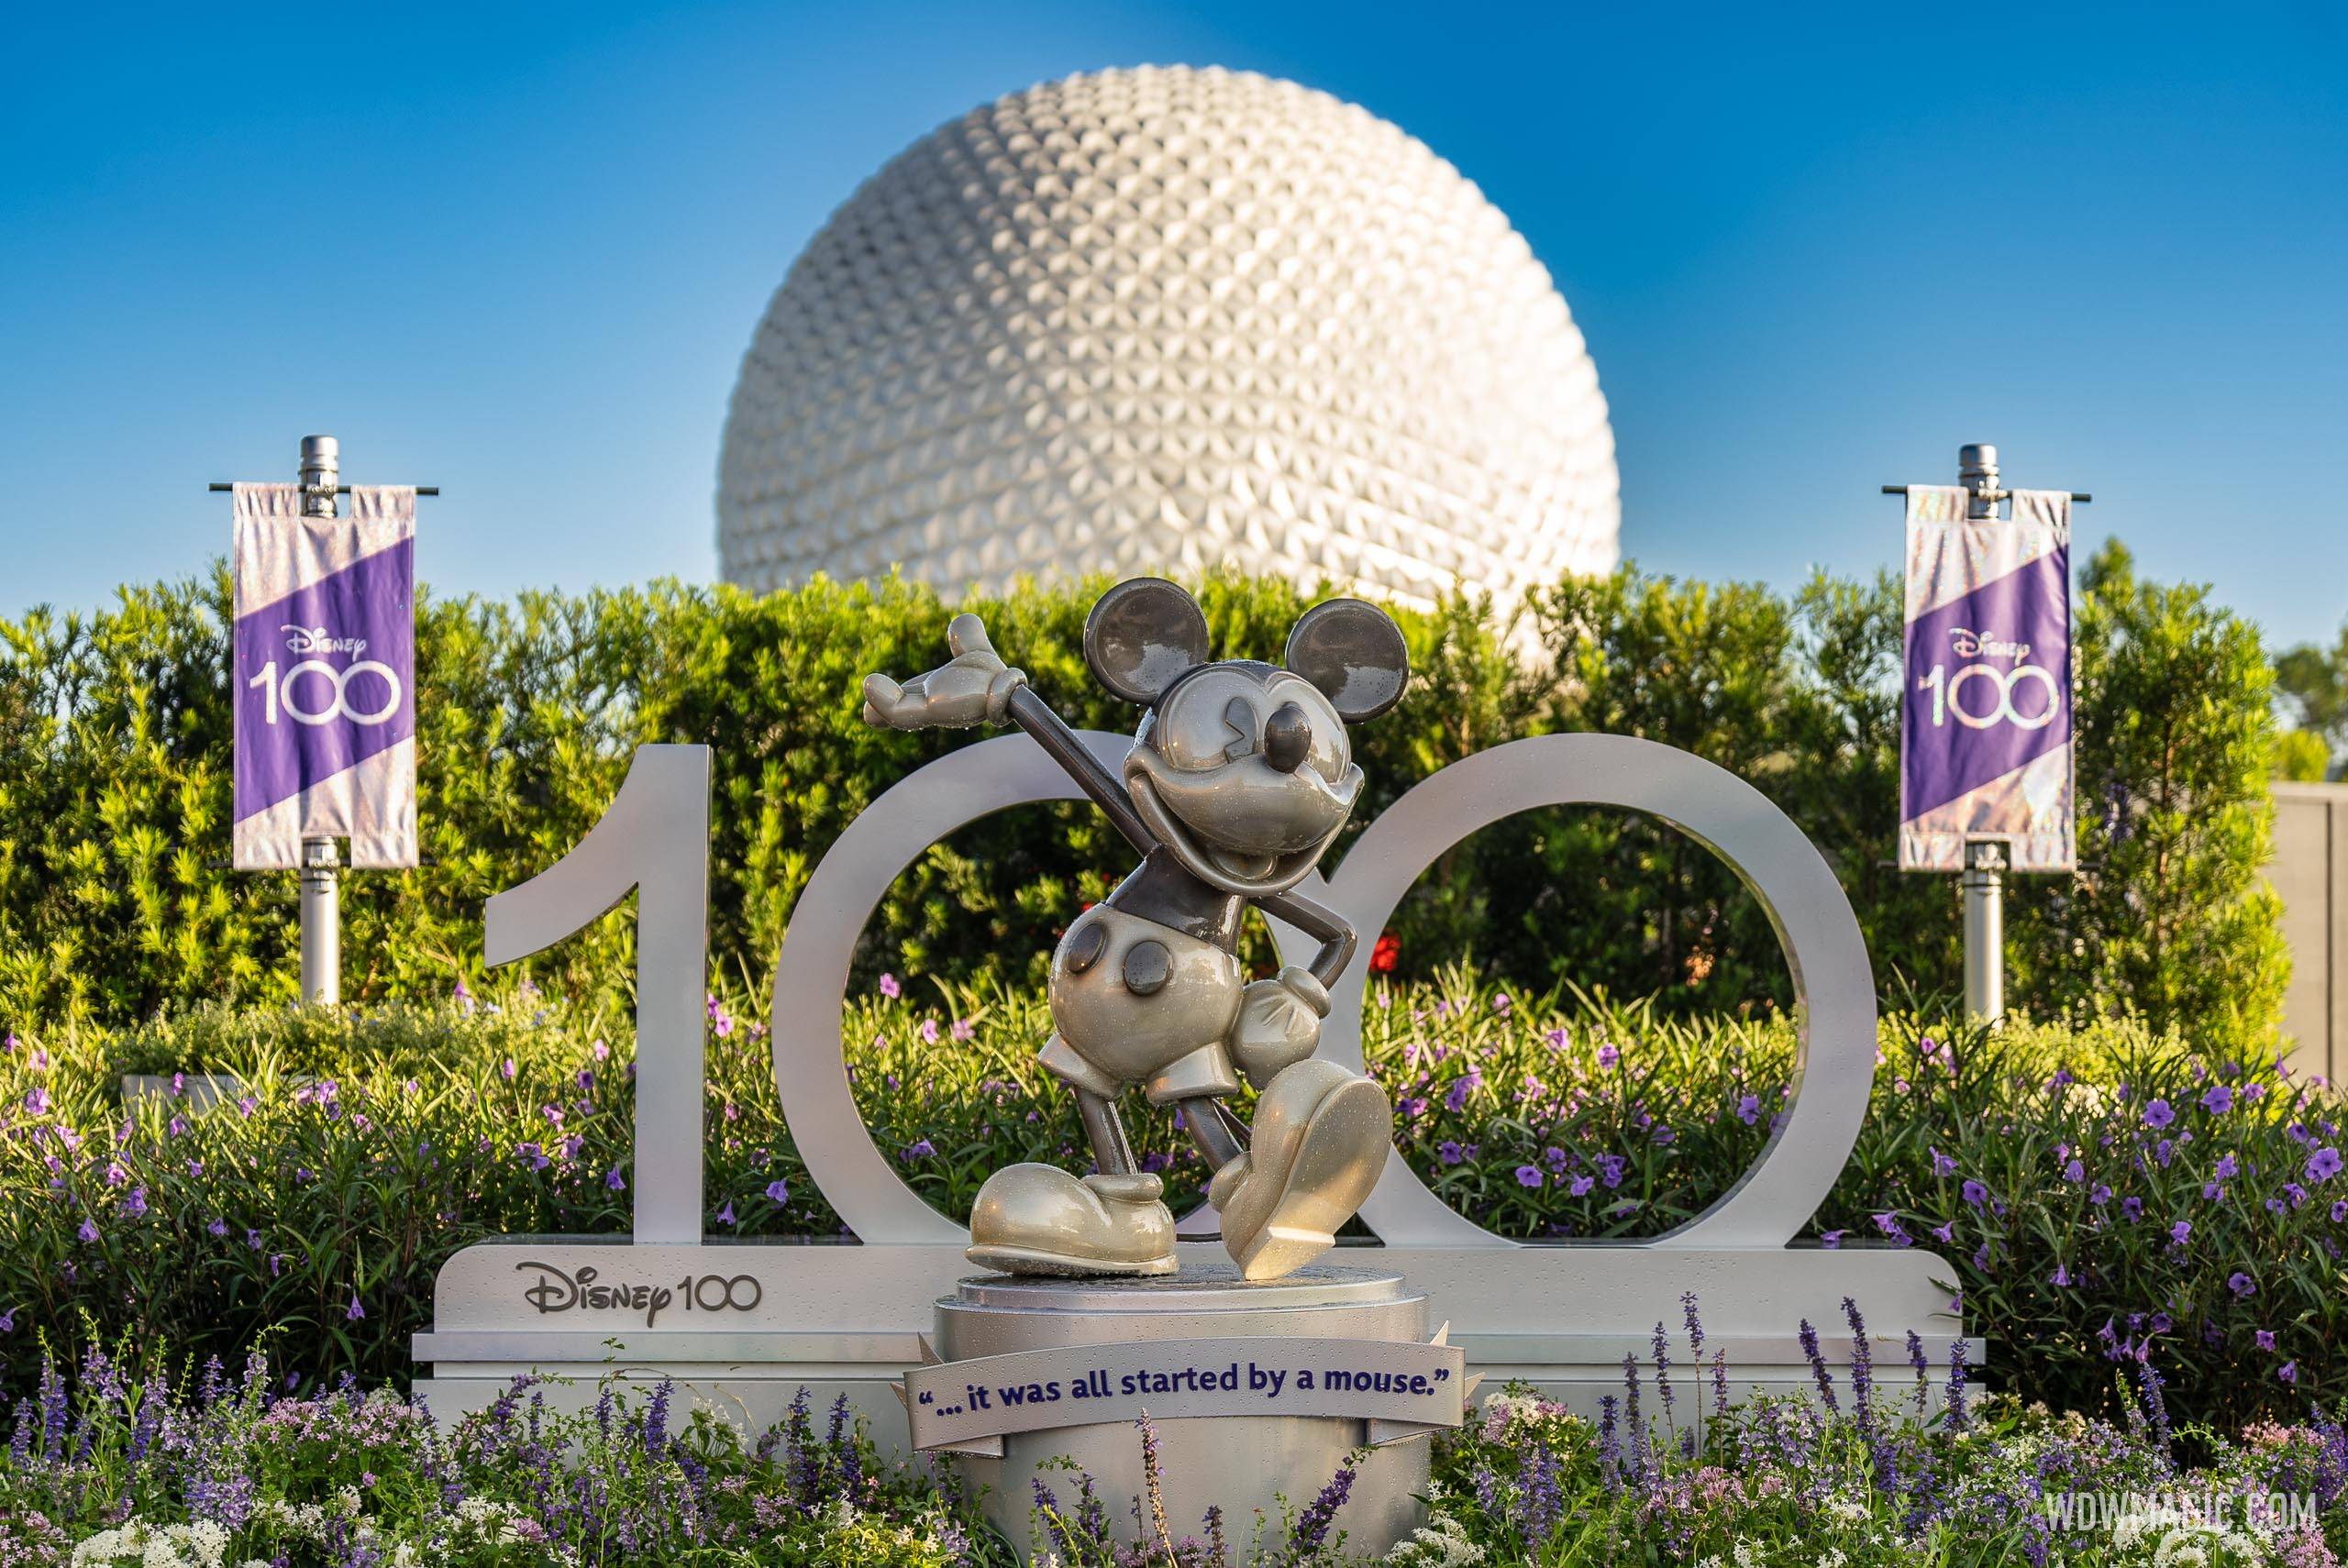 Disney100 commemorated with new platinum Mickey Mouse sculpture at EPCOT